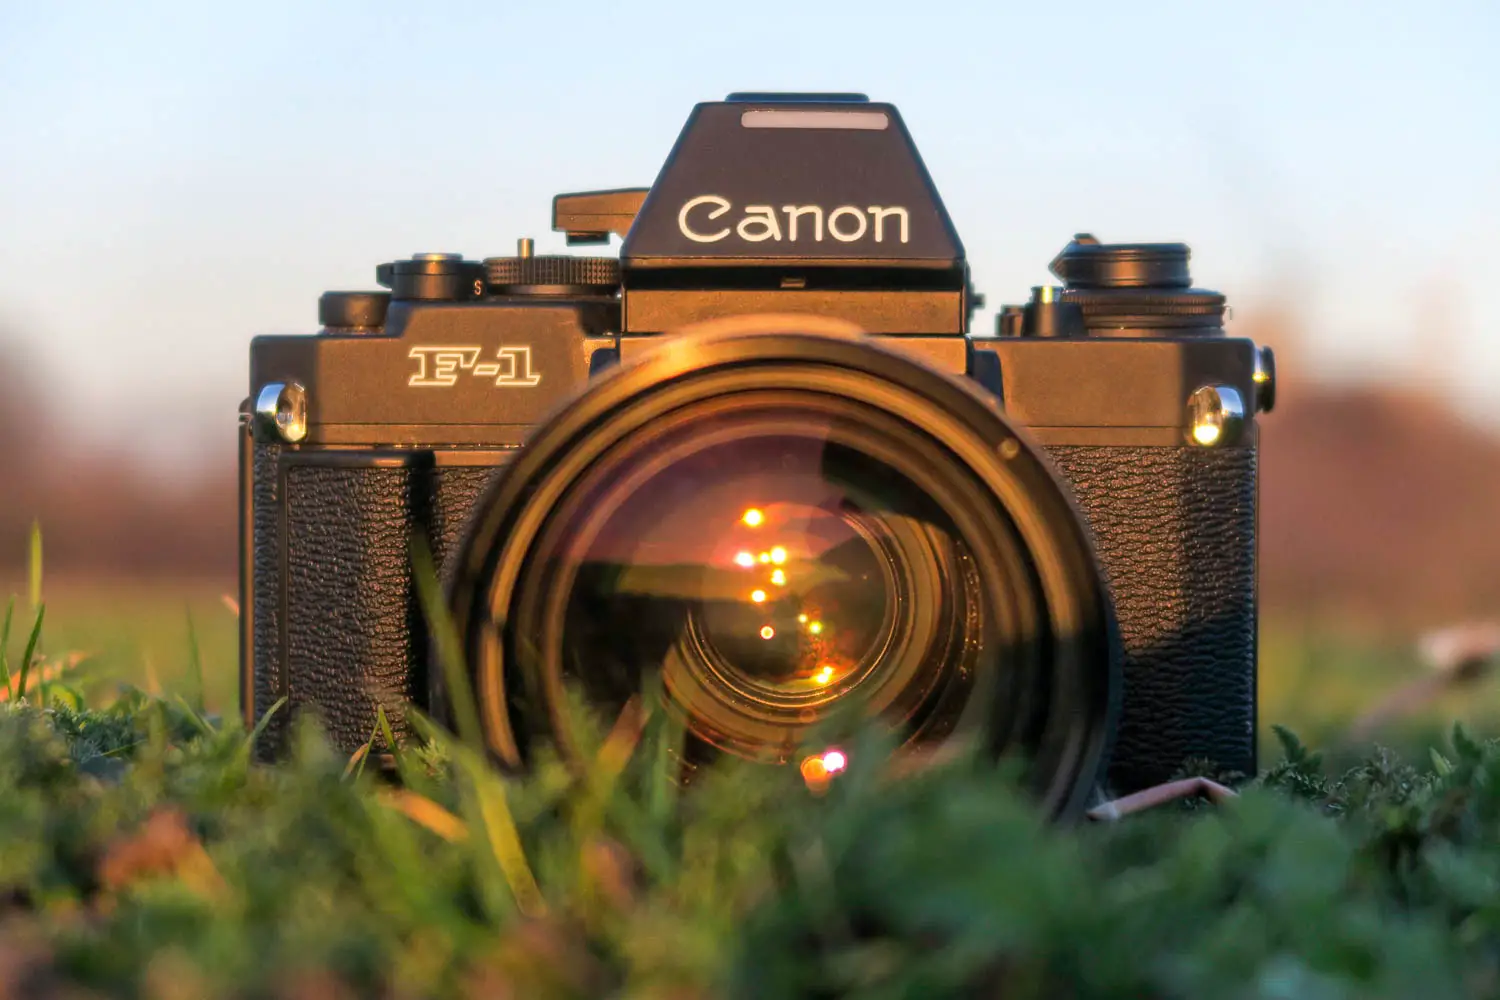 5 Frames with Canon F-1 - By Ben Kepka - 35mmc